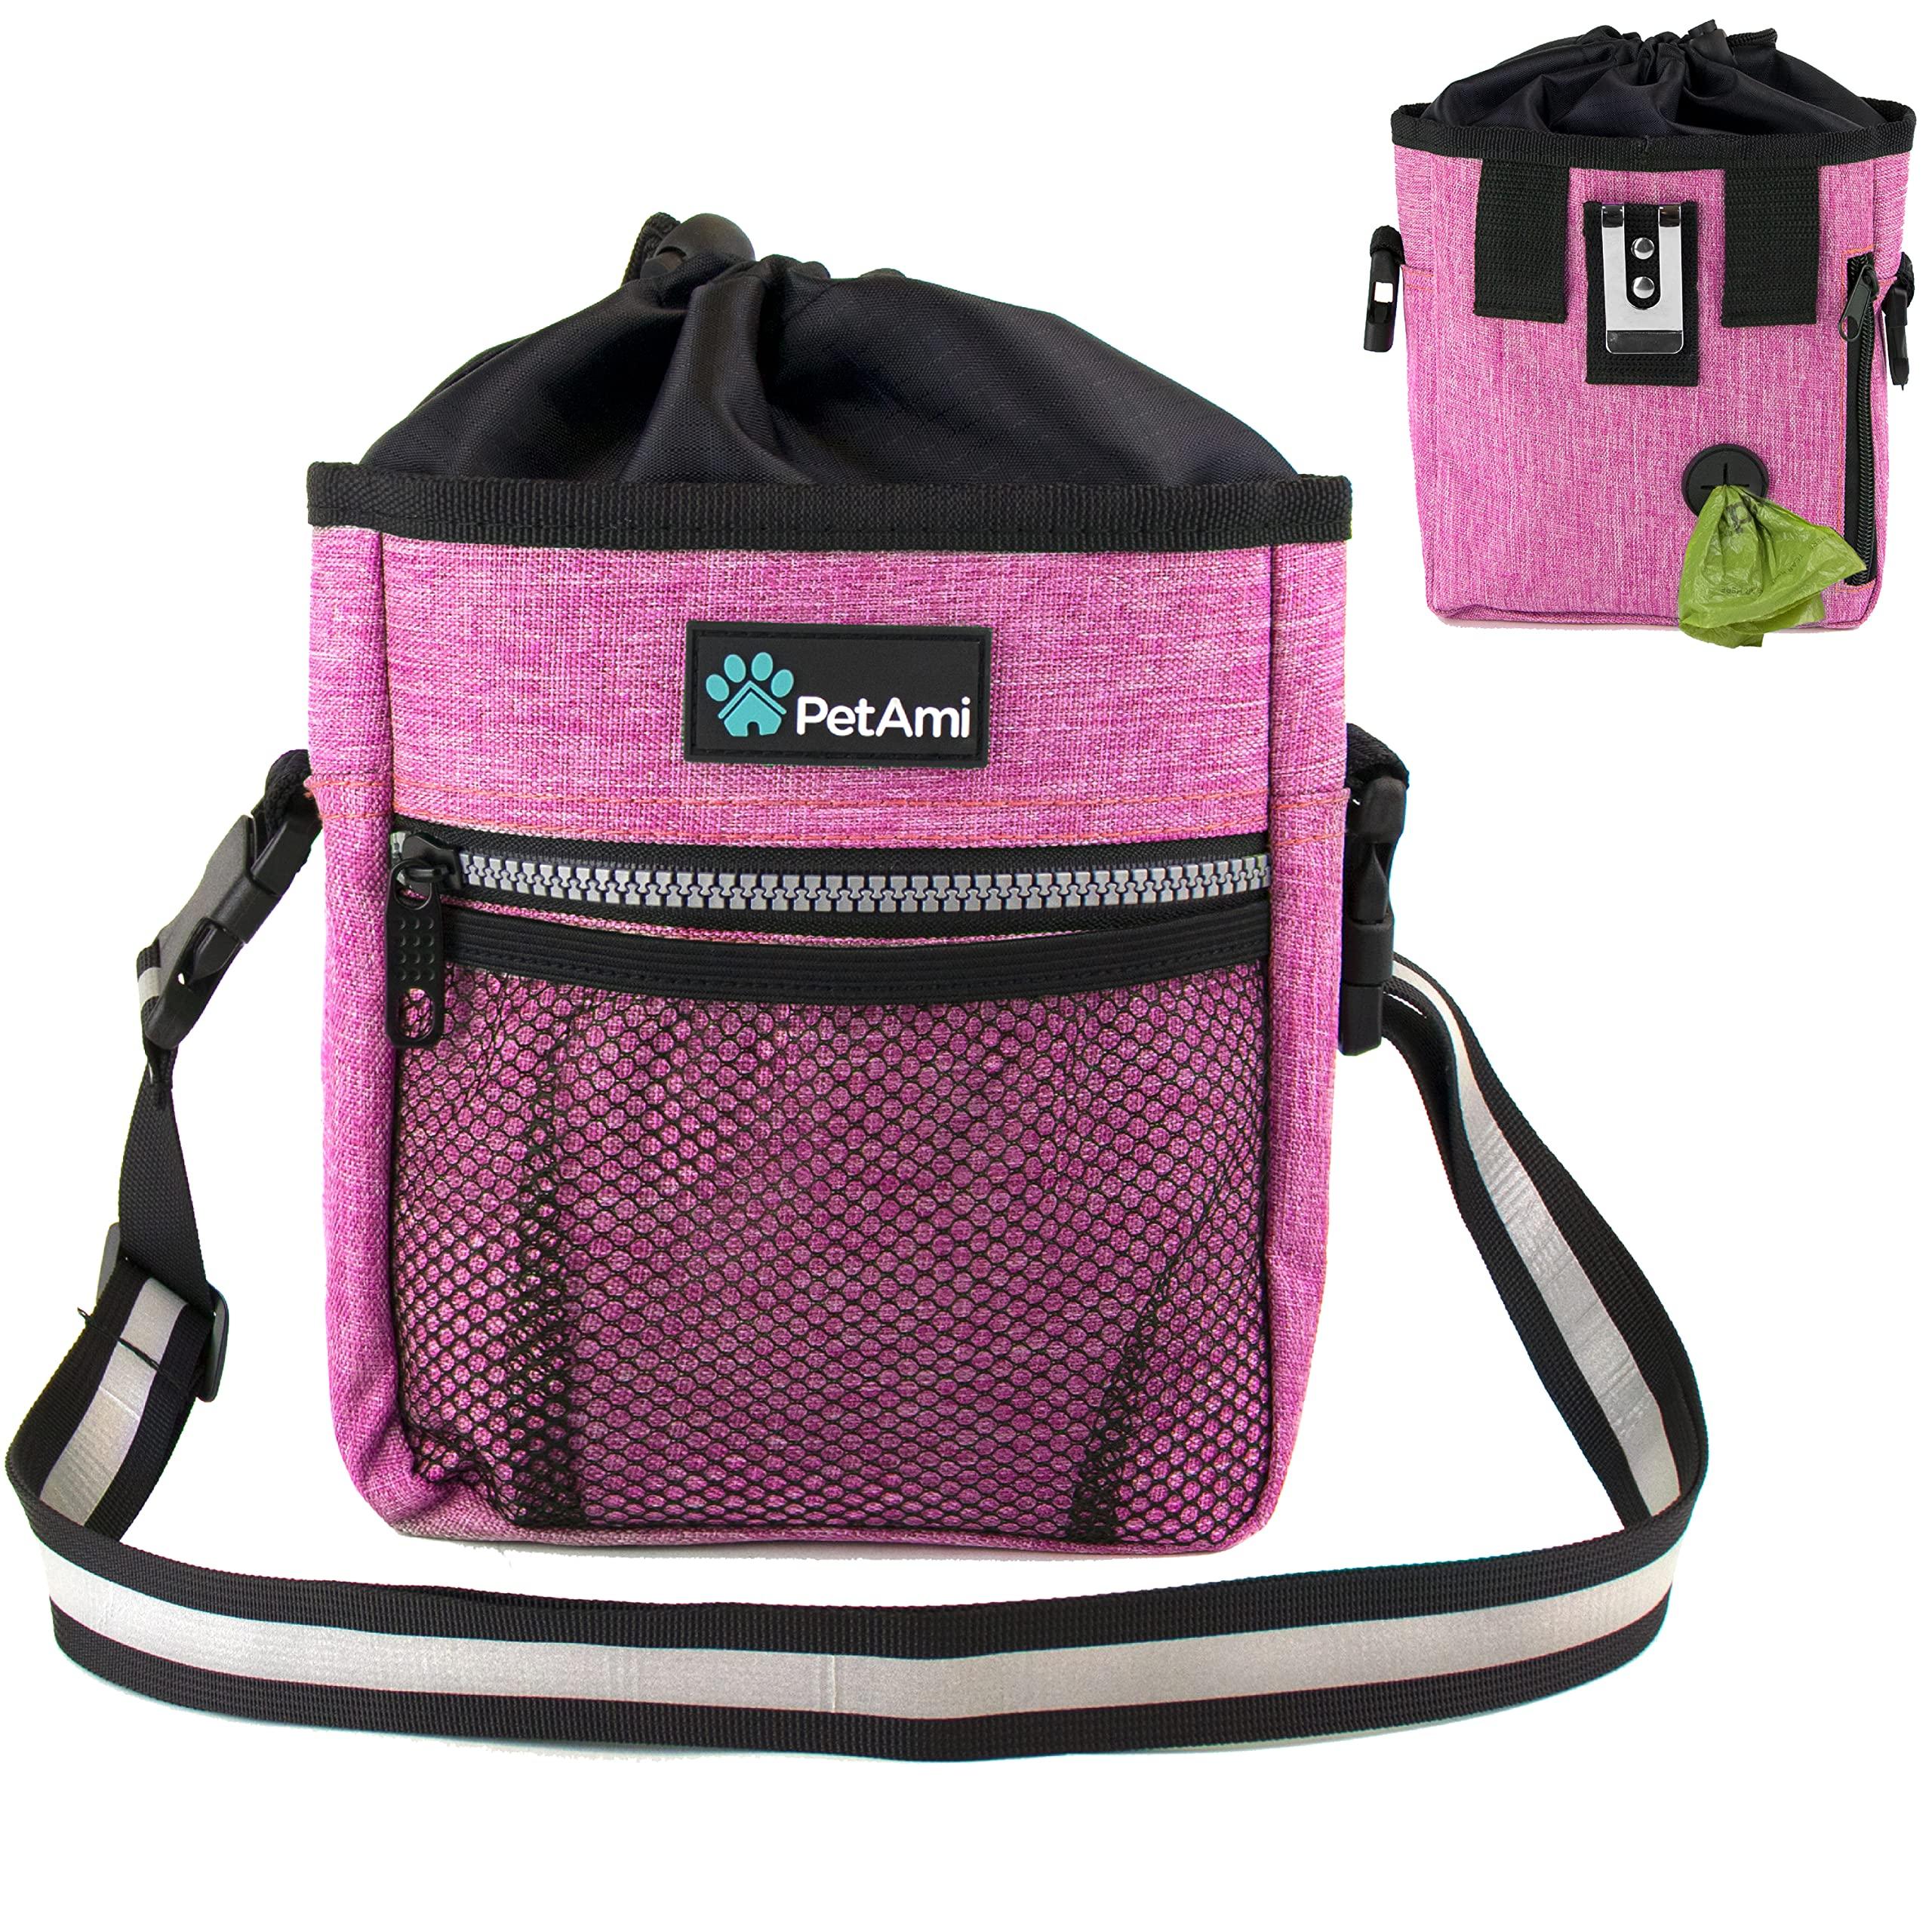 PetAmi Dog Treat Pouch | Dog Training Pouch Bag with Waist Shoulder Strap, Poop Bag Dispenser and Collapsible Bowl | Treat Training Bag for Treats, Kibbles, Pet Toys | 3 Ways to Wear (Pink)